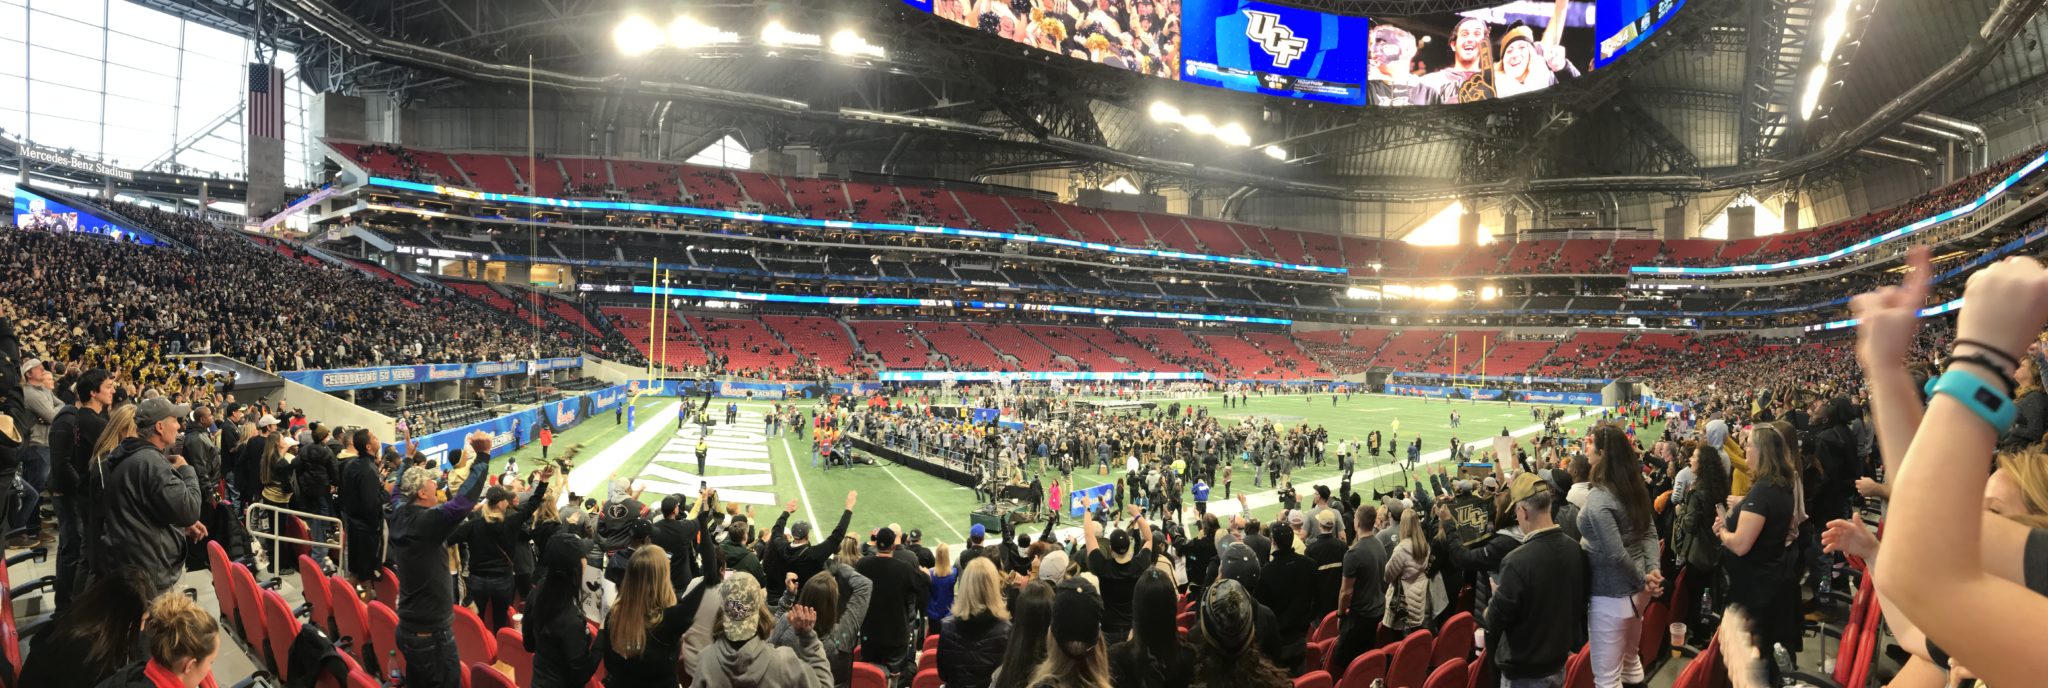 UCF fans celebrate their Knights defeating Auburn in the 2018 Chick-fil-a Peach Bowl at Mercedes-Benz Stadium in Atlanta. (Photo: Jeff Sharon)